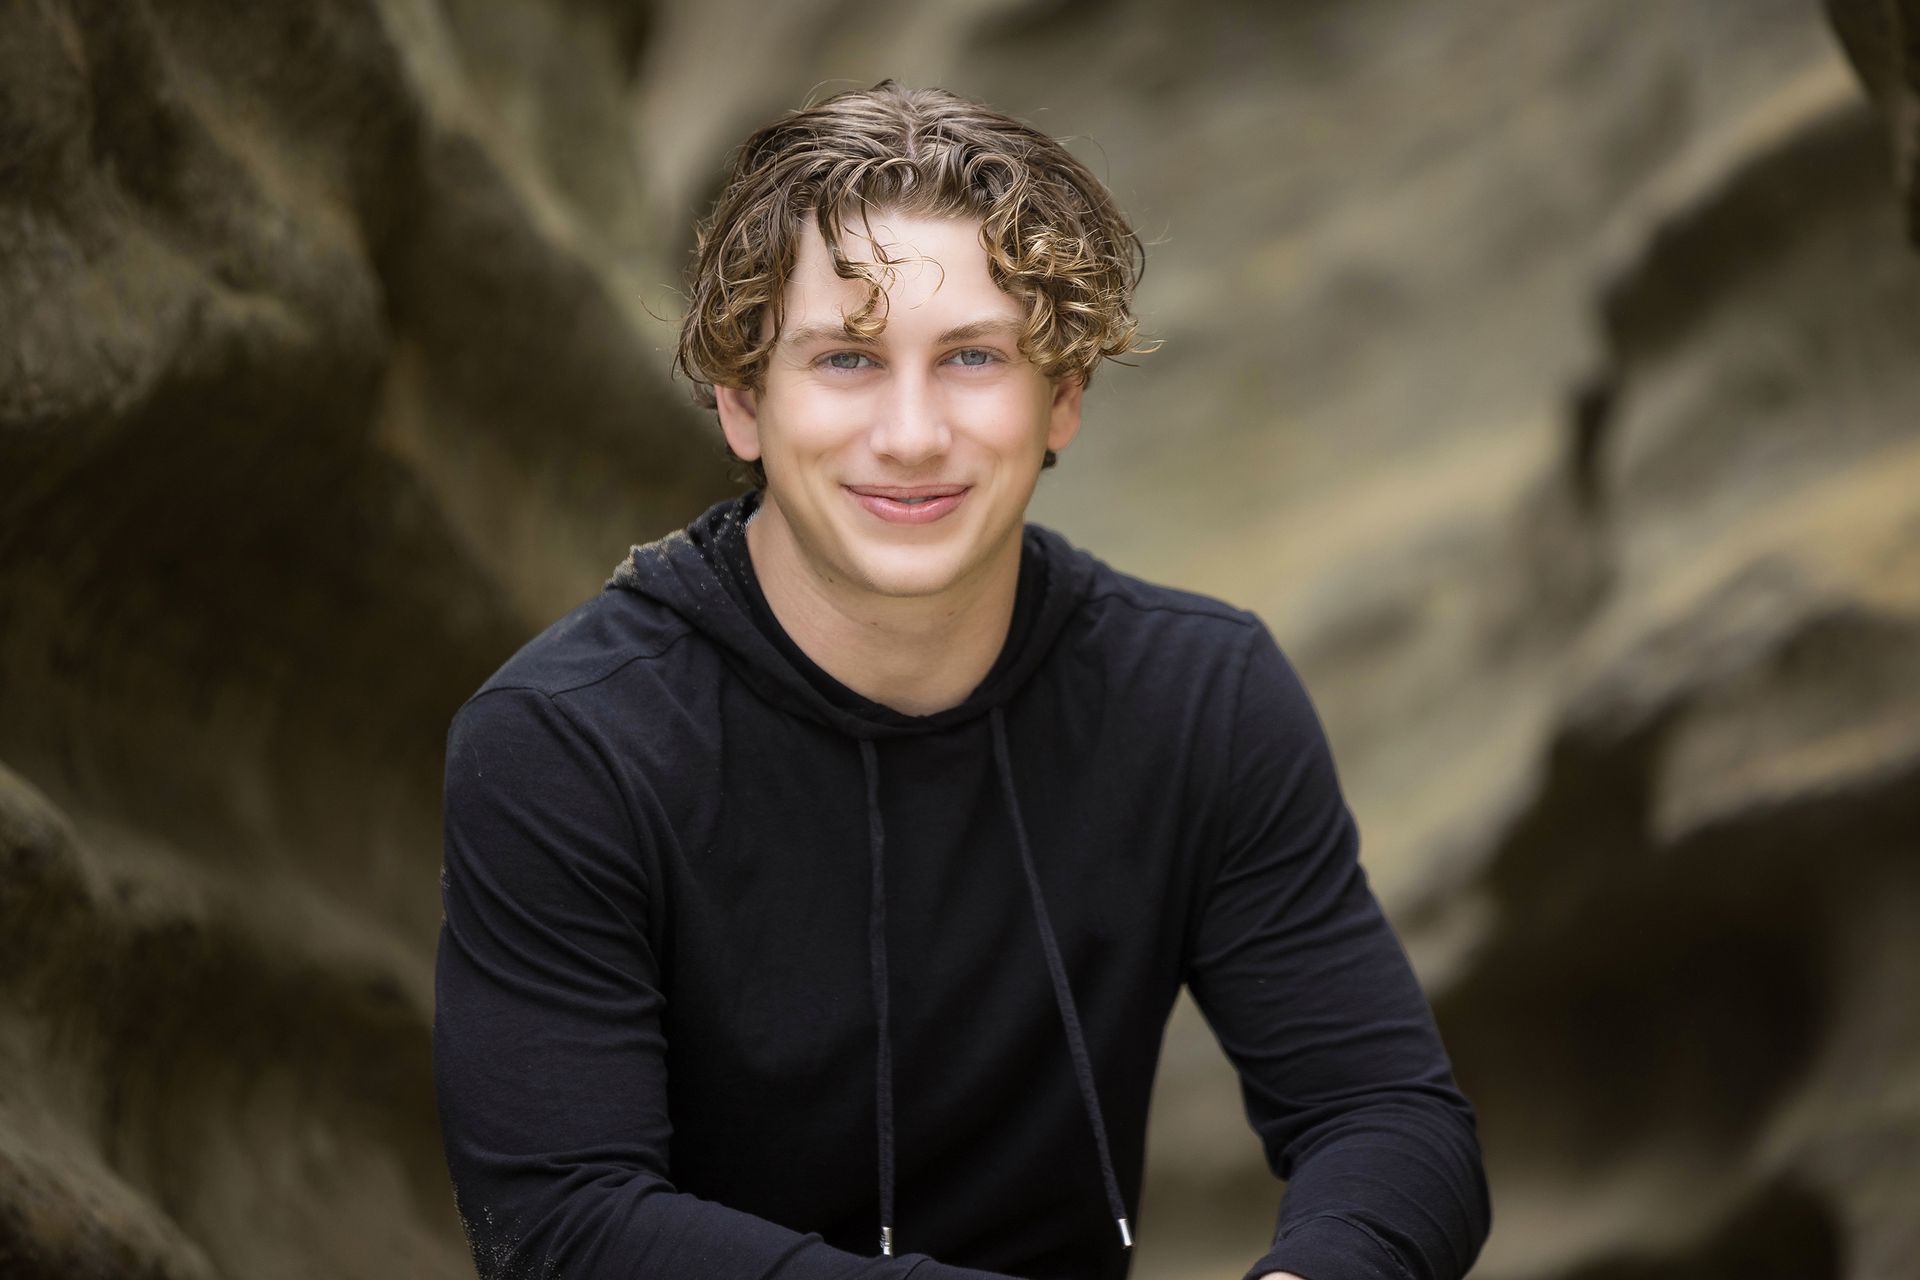 High School Senior Guy at San Clemente State Beach doing his senior portrait photography session.